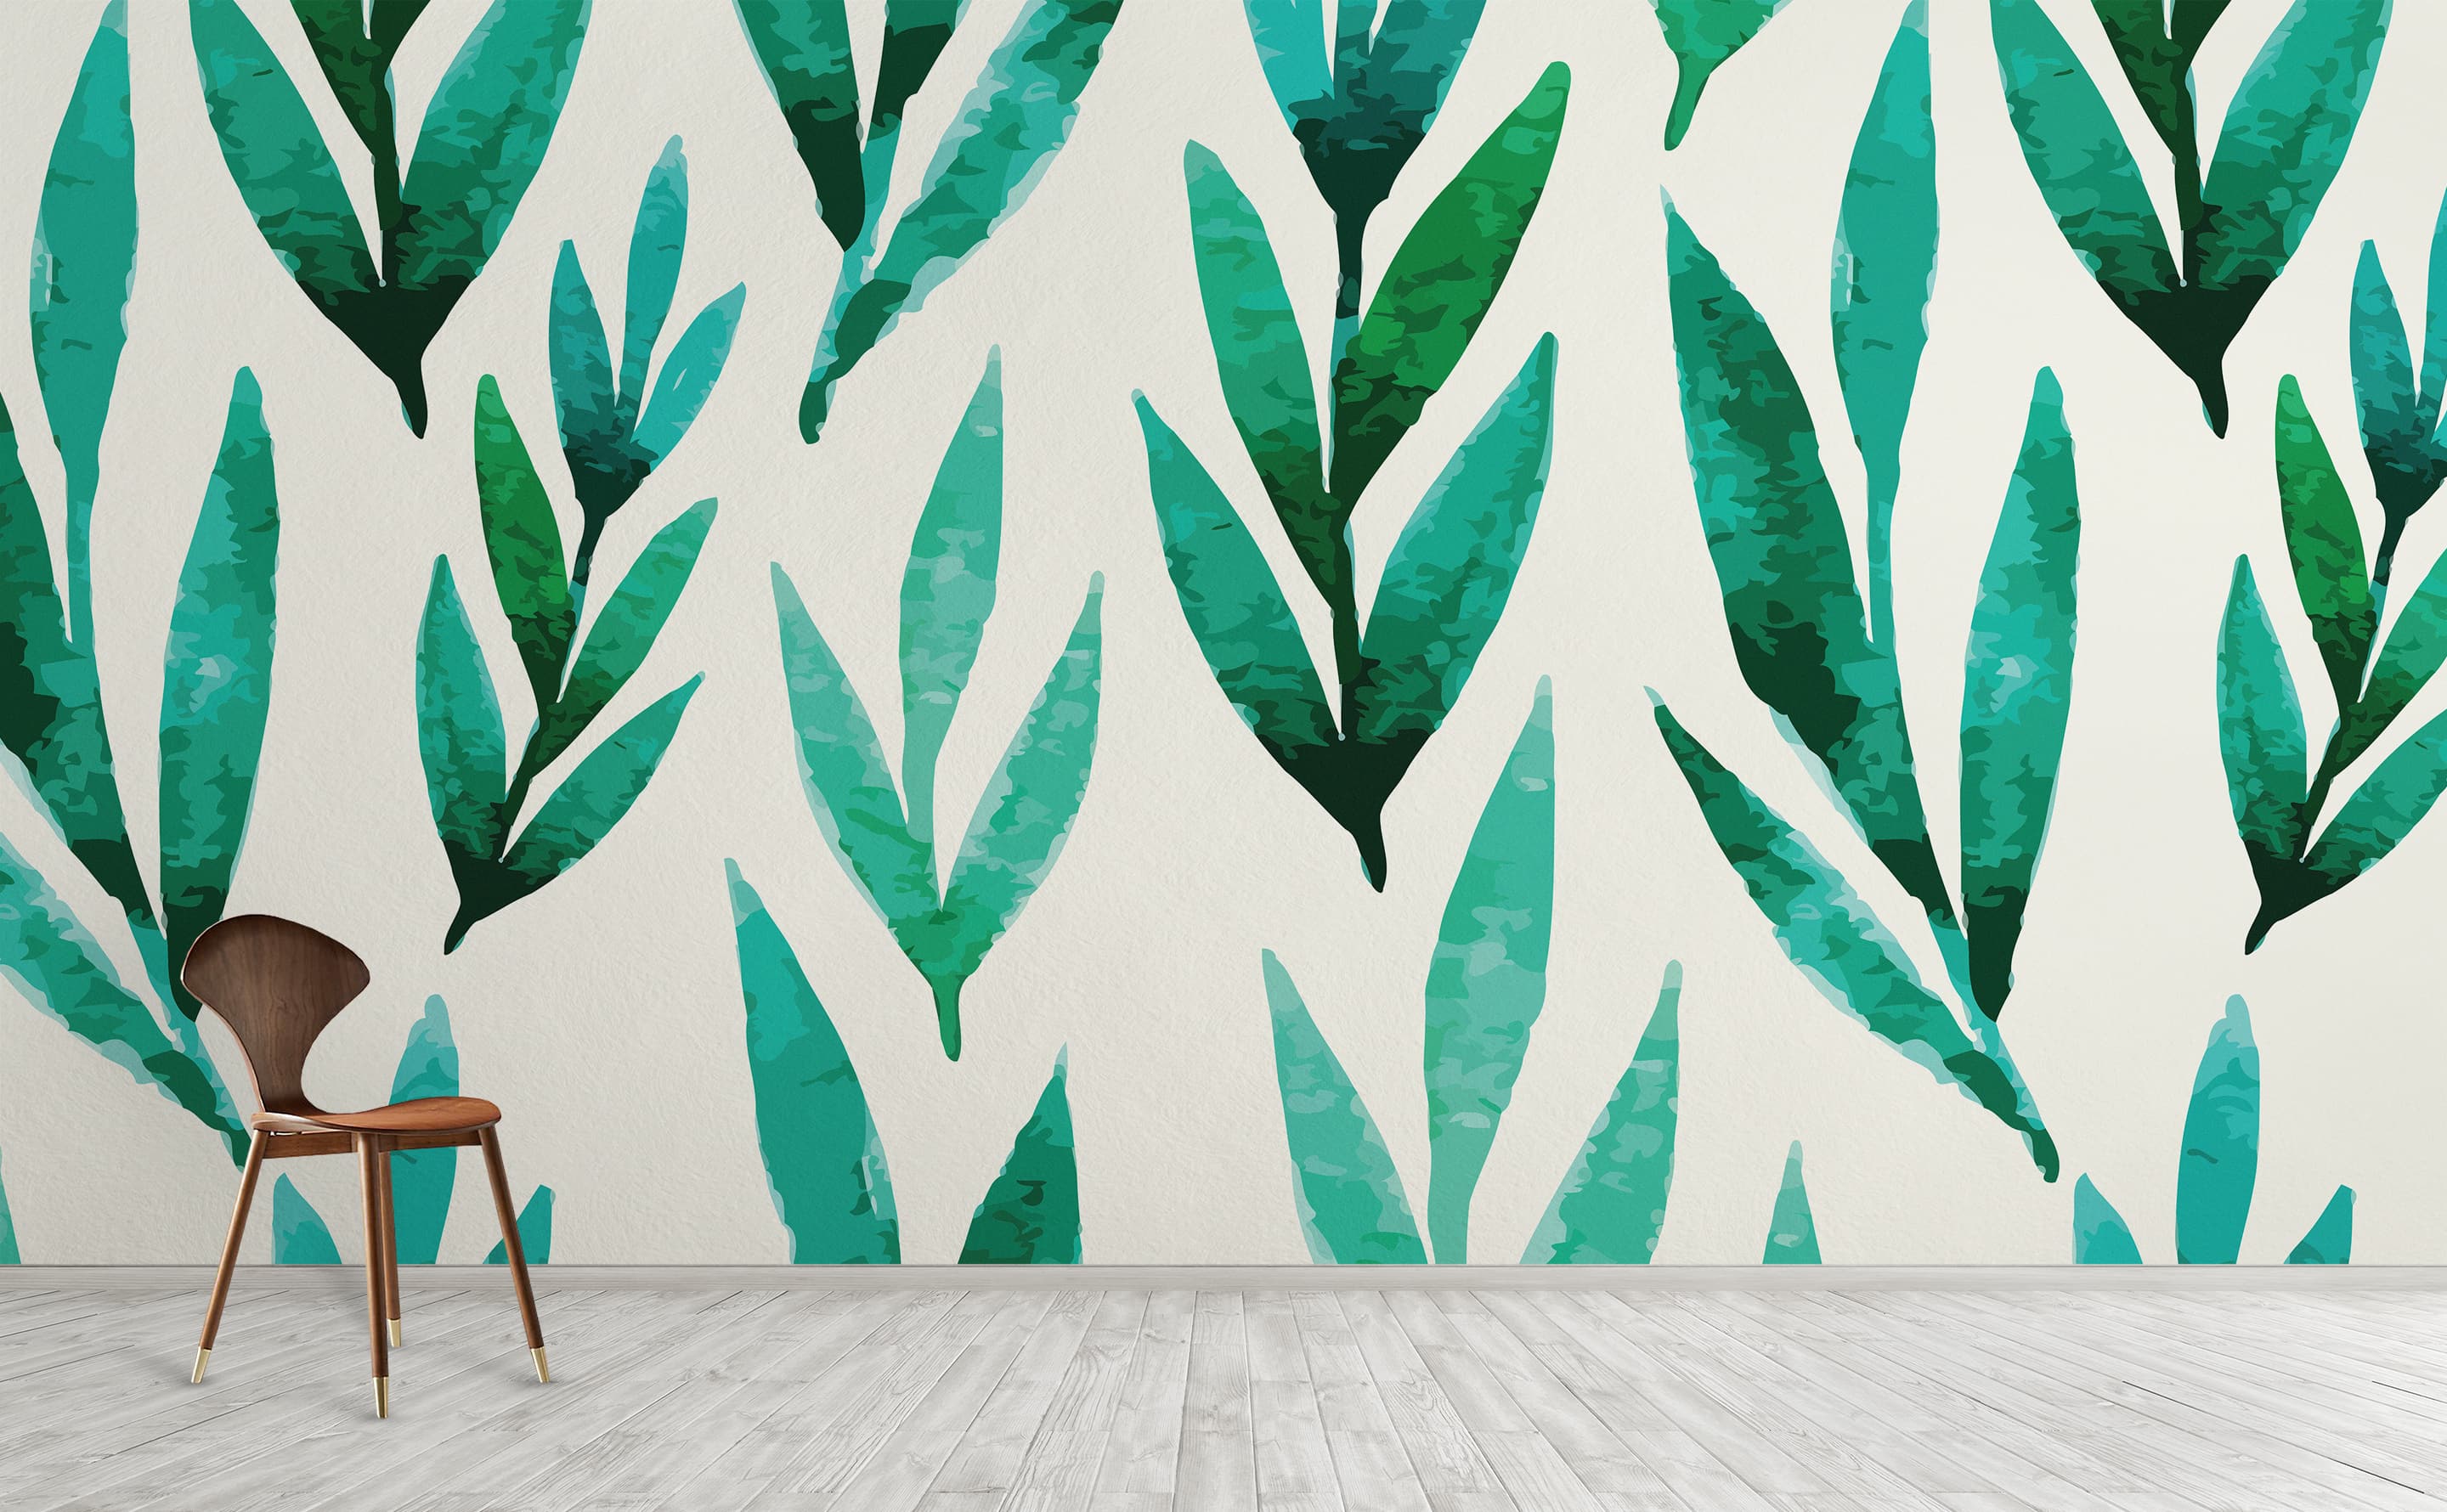 River Bed Wall Mural by Walls Need Loveﾮ